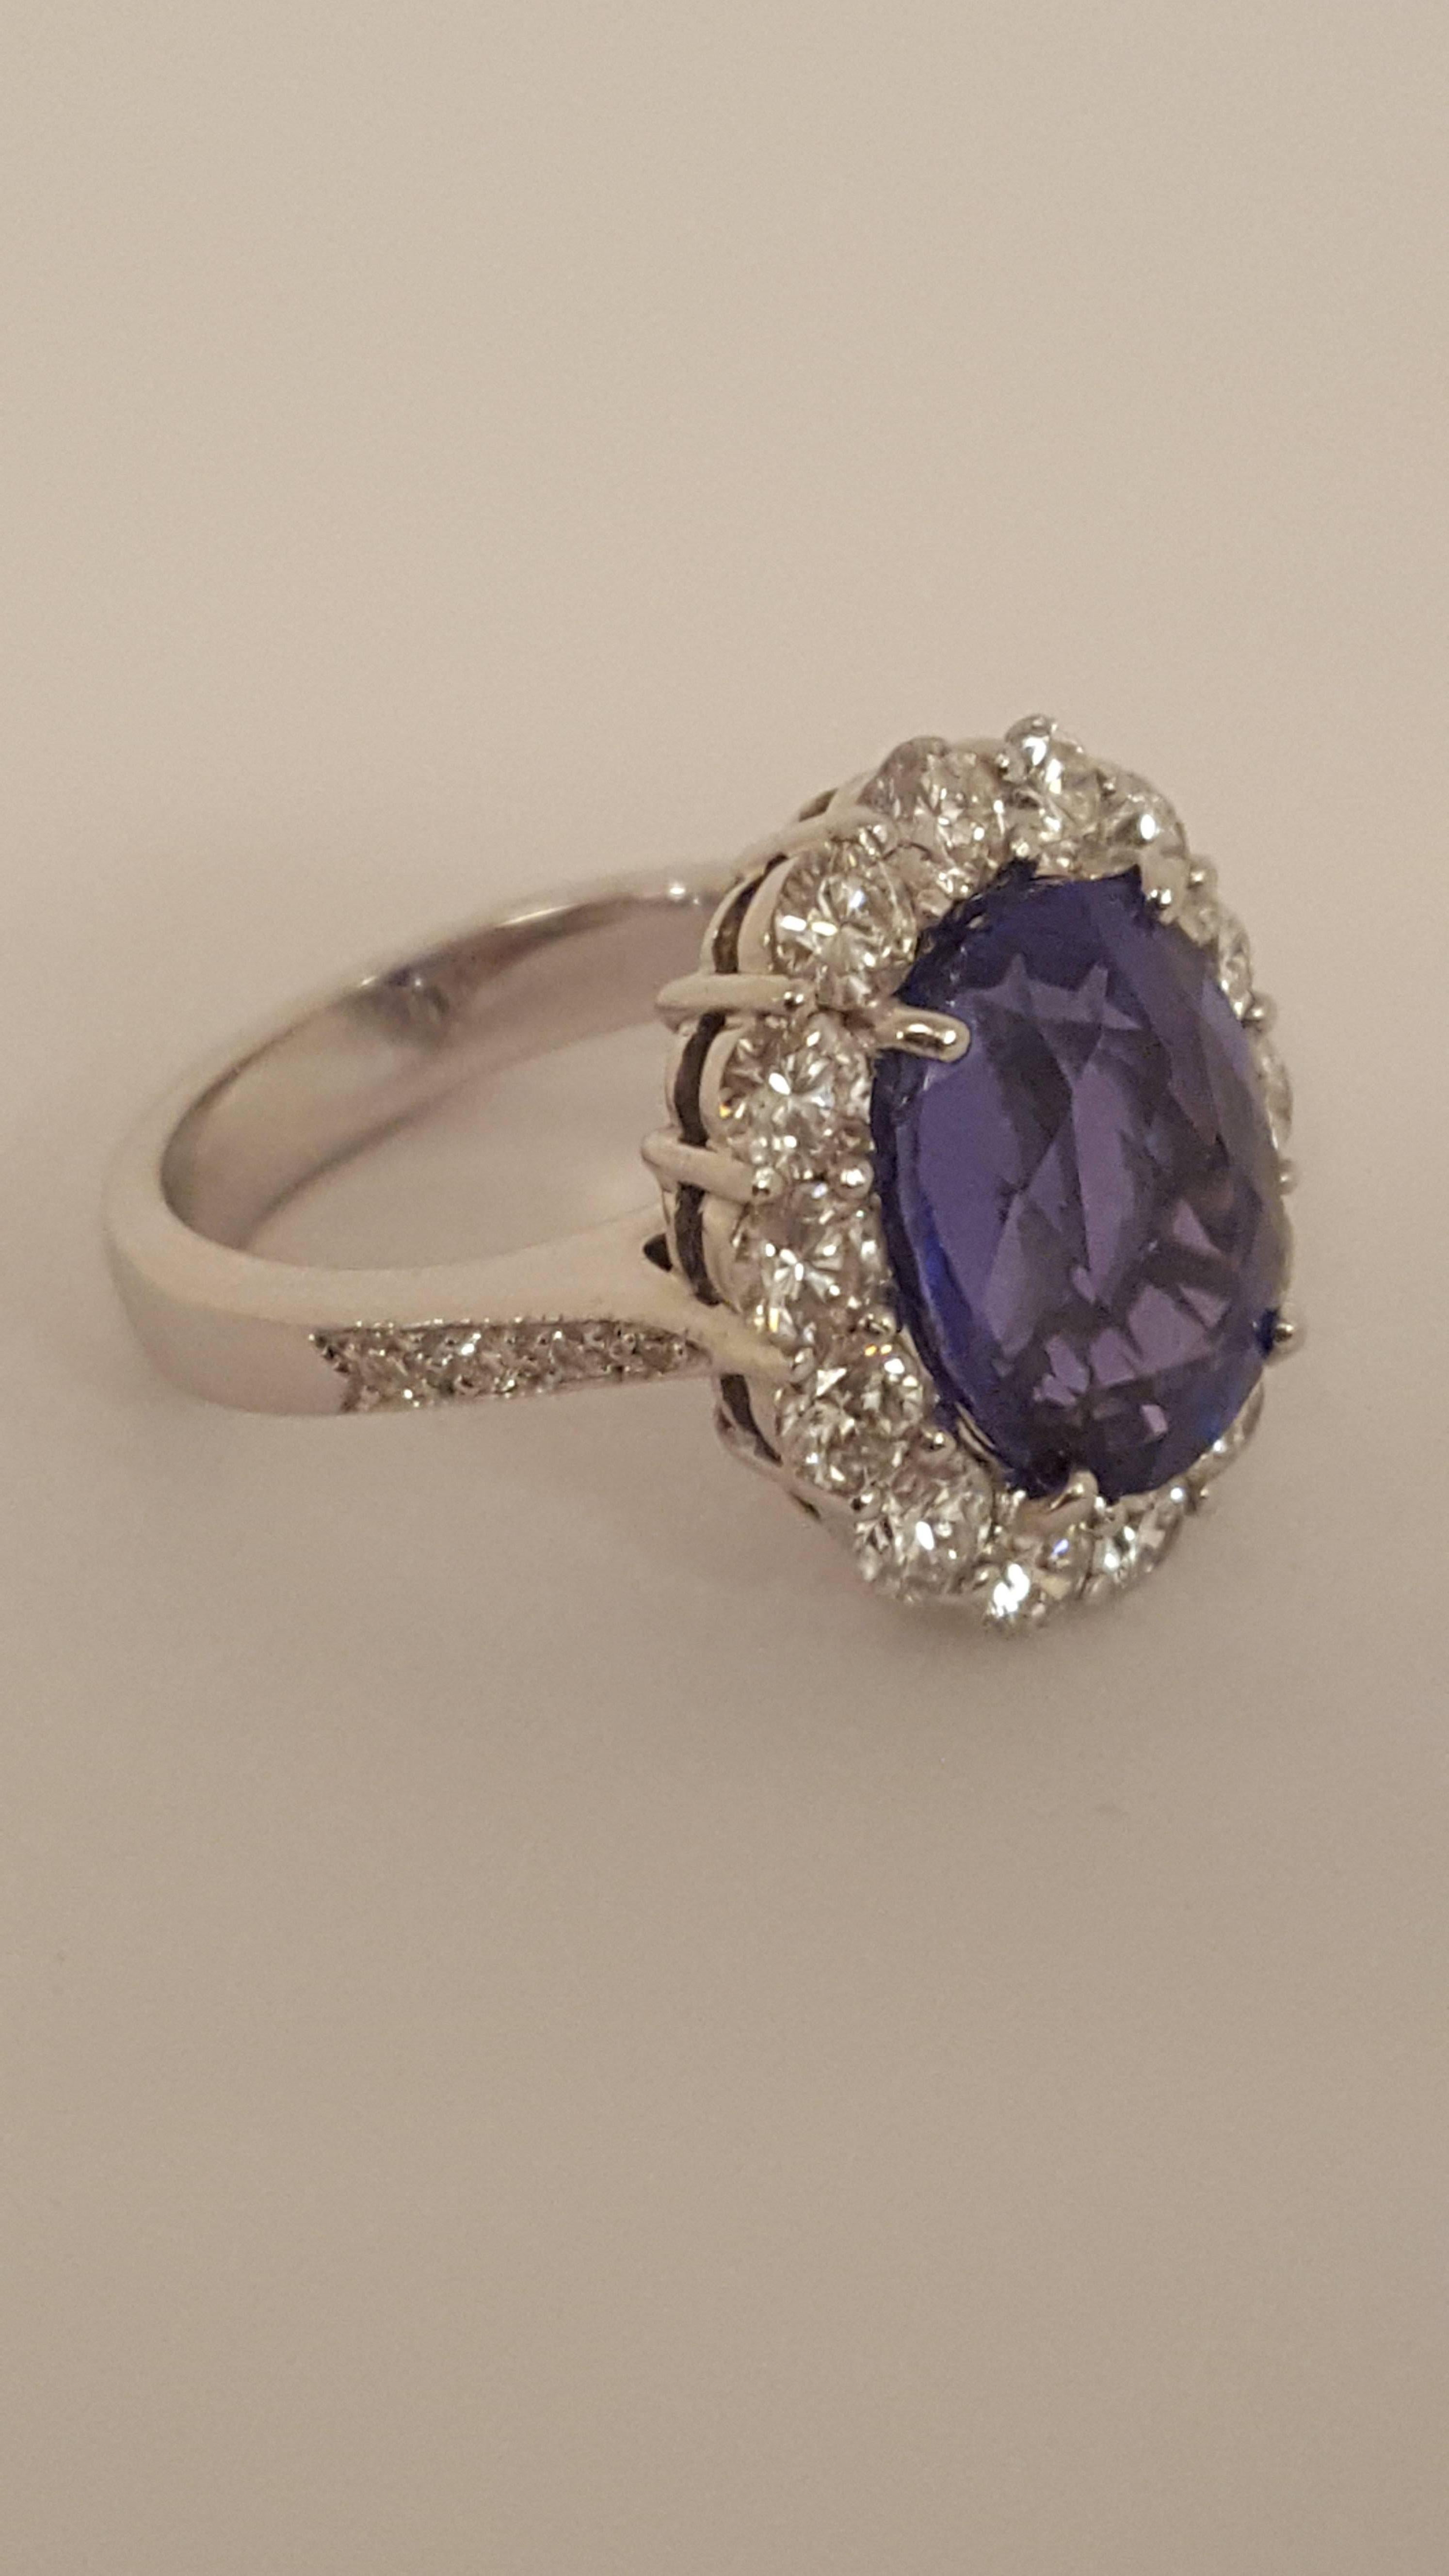 Purchased in 2001 from Neiman Marcus, this beautifully crafted 18 karat white gold ring boasts an oval, faceted tanzanite with a great deal of purple hues and even color saturation.  Tanzanite weighs in at 7.40 carats!  Impressive on its own but